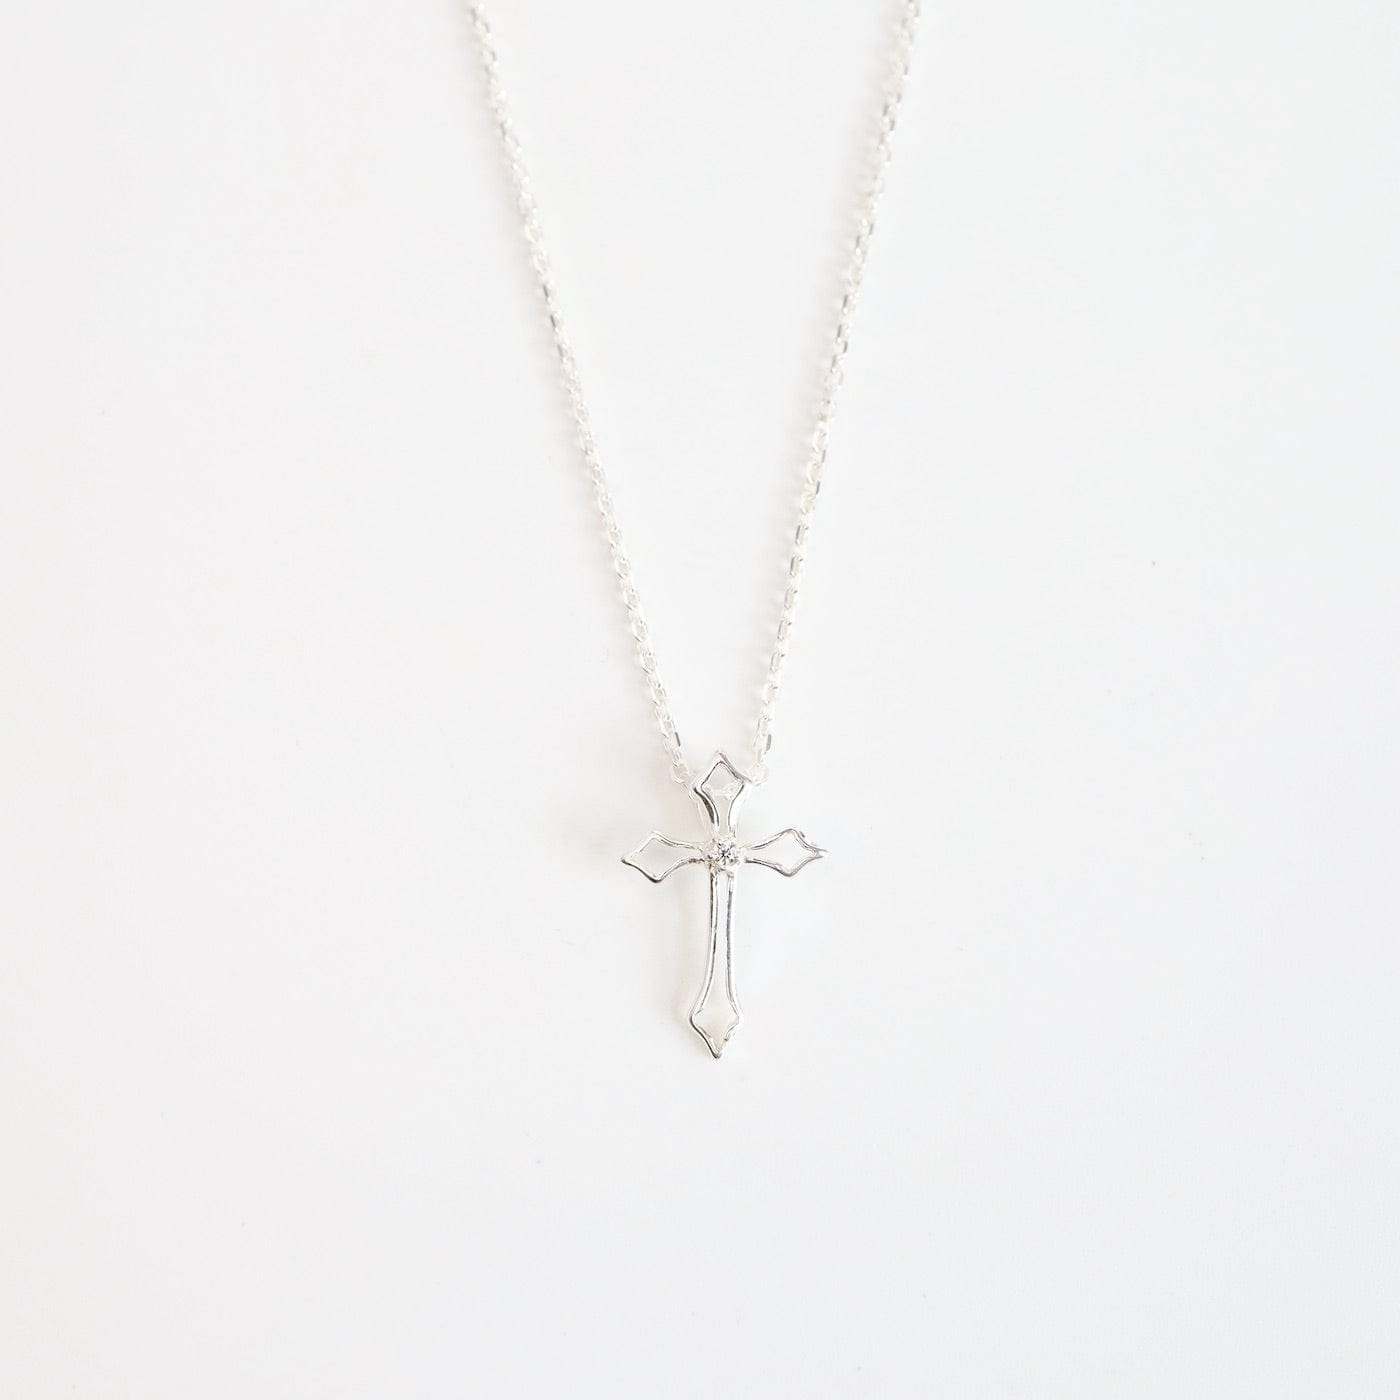 NKL Sterling Silver Cross with Crystal Necklace